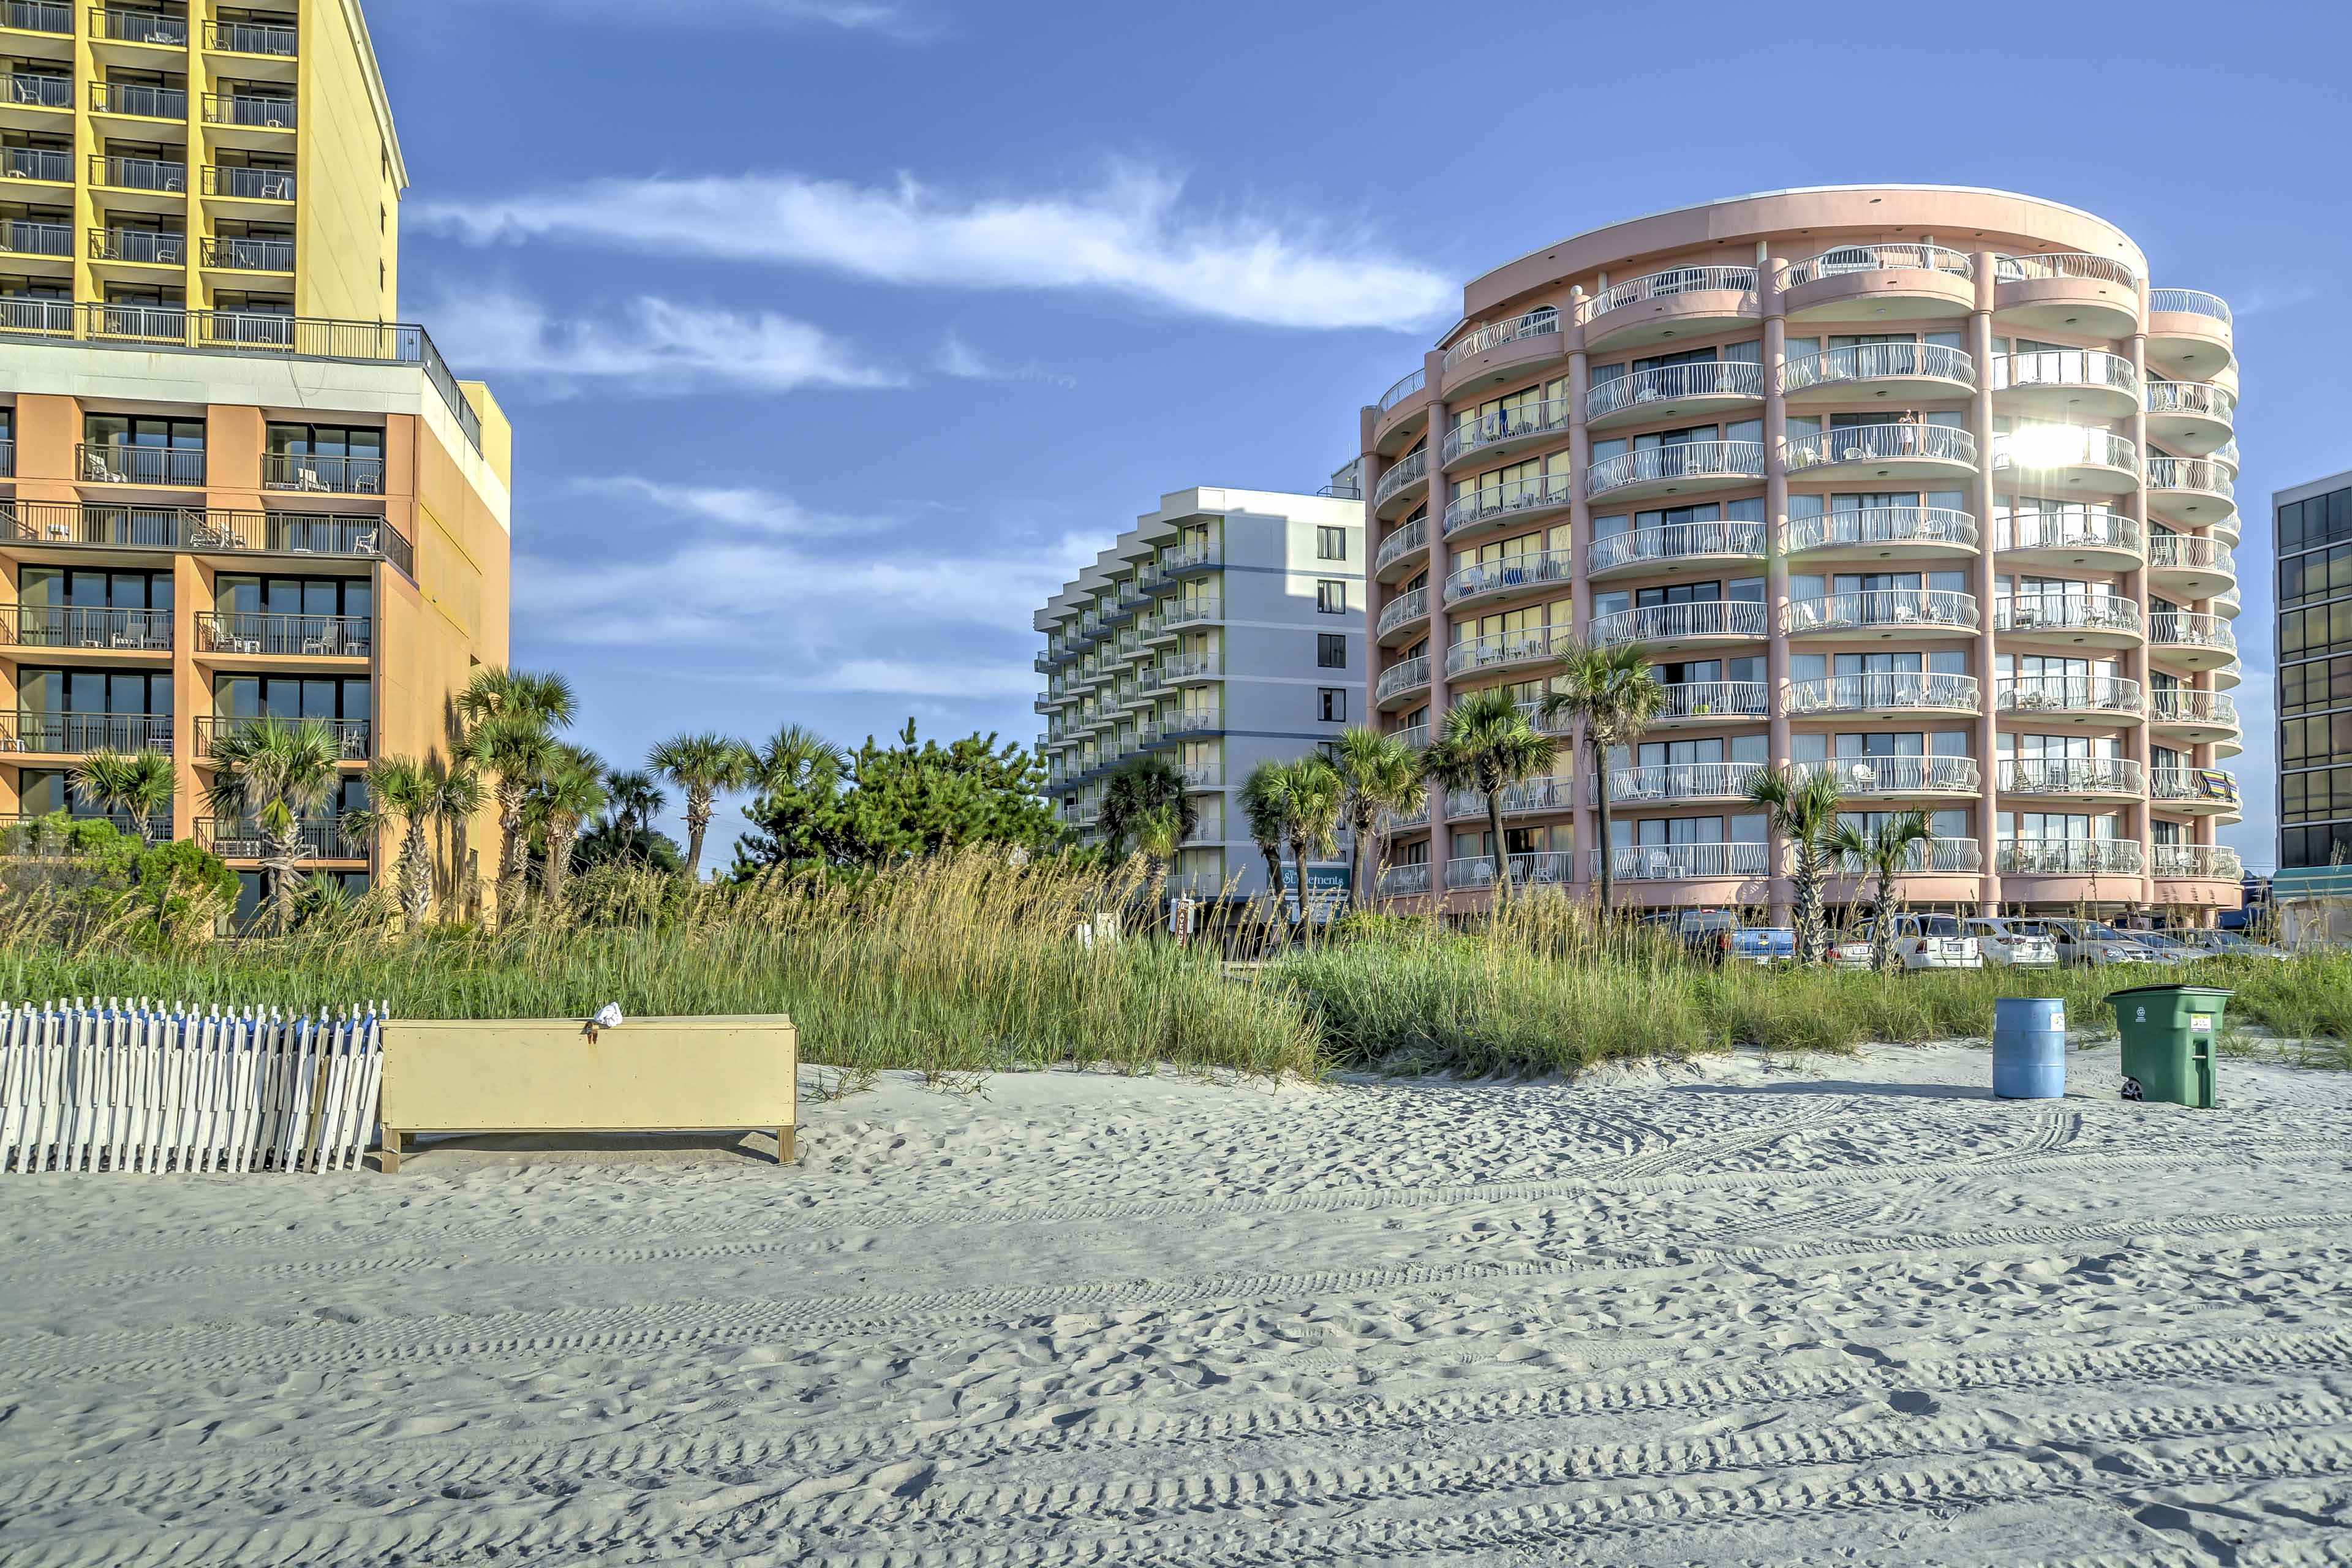 Just steps from the beach, you'll have no shortage of fun in the sun.